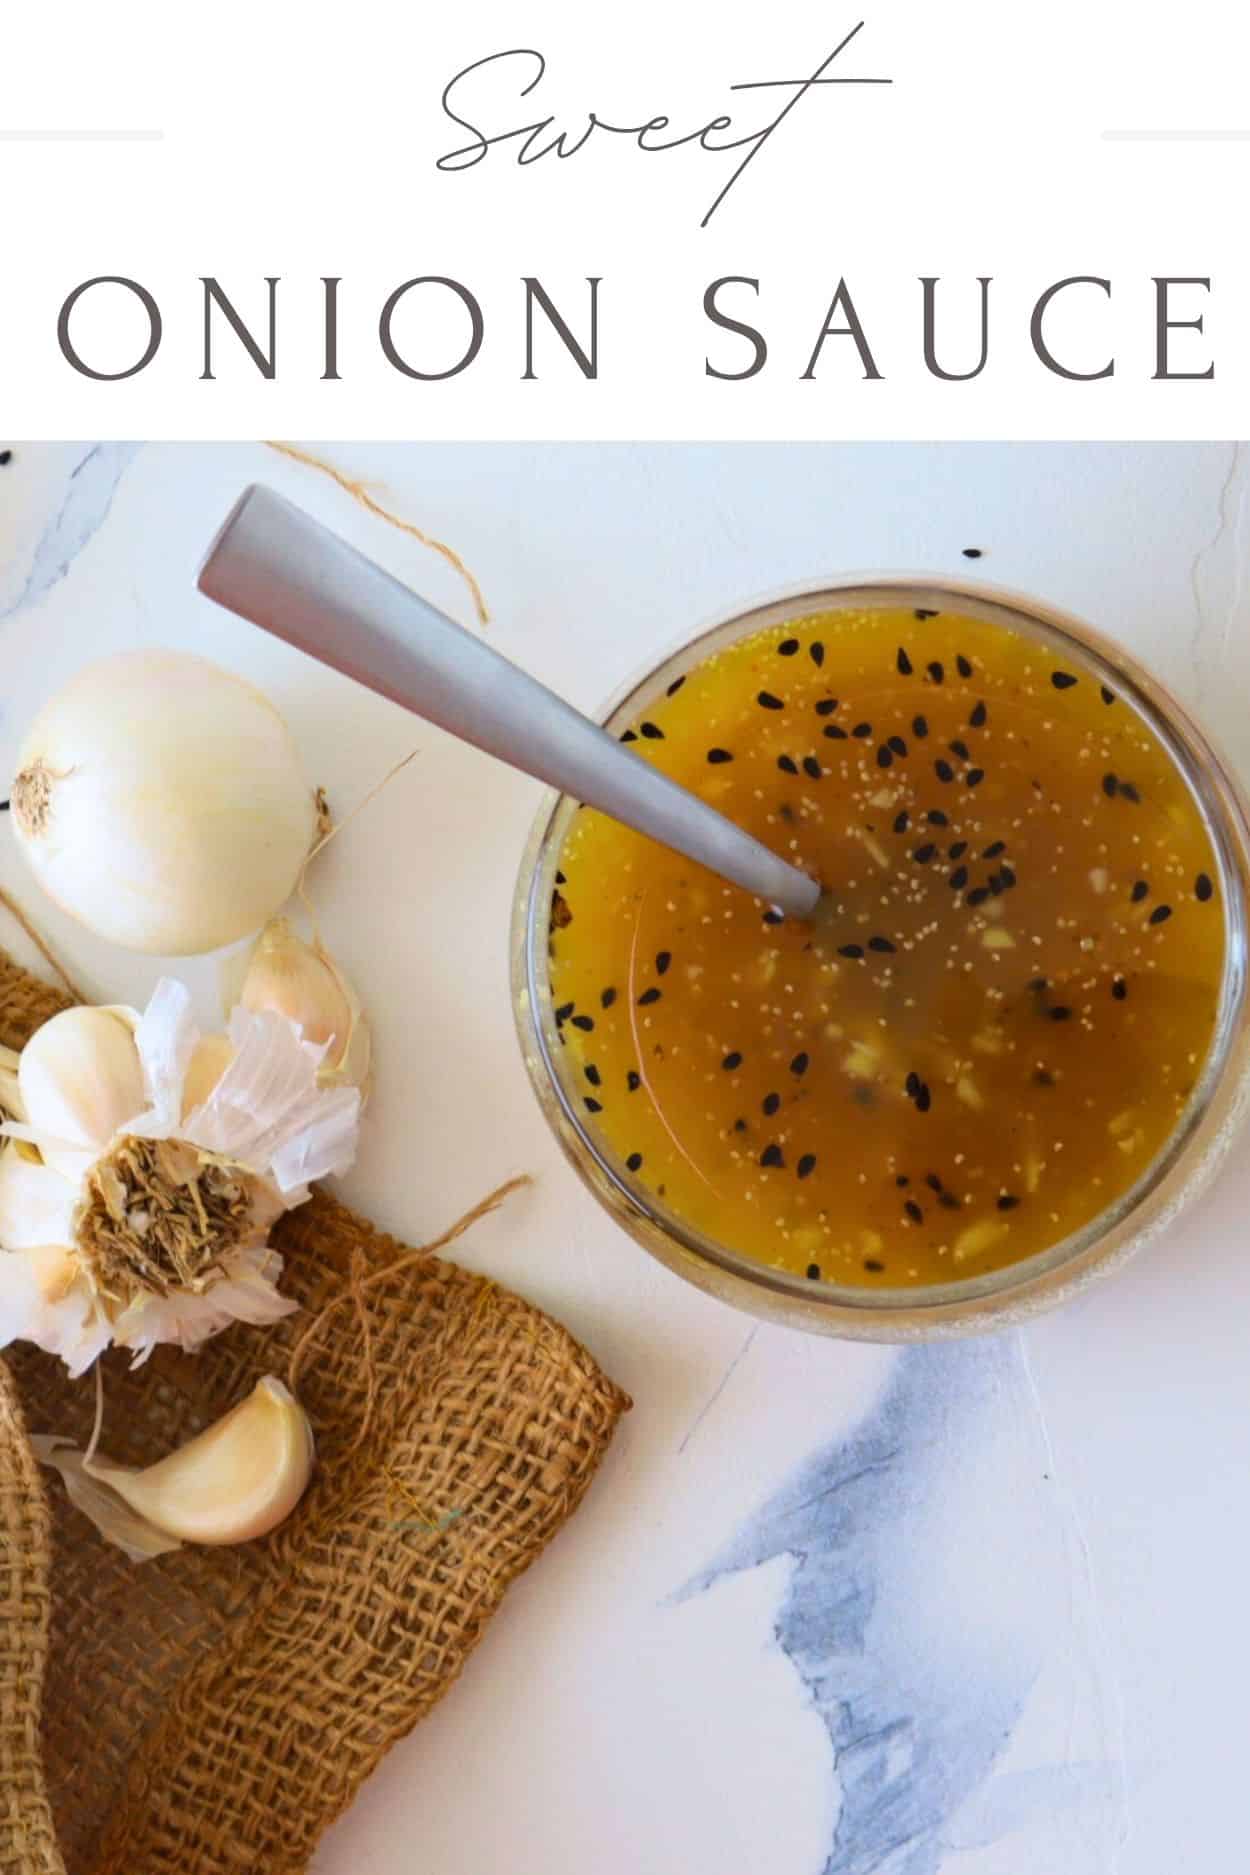 This easy copycat recipe recreates Subway's craveworthy Sweet Onion sauce at home with only 5 ingredients you likely have on hand! Simmer onions, sugar and spices into the perfect tangy and sweet dipping sauce for sandwiches, chicken tenders or veggie dipping in just 10 minutes. Far better than heading out to the sandwich shop, make a batch of this flavorful homemade dupe that all your family will love for a fraction of takeout prices!